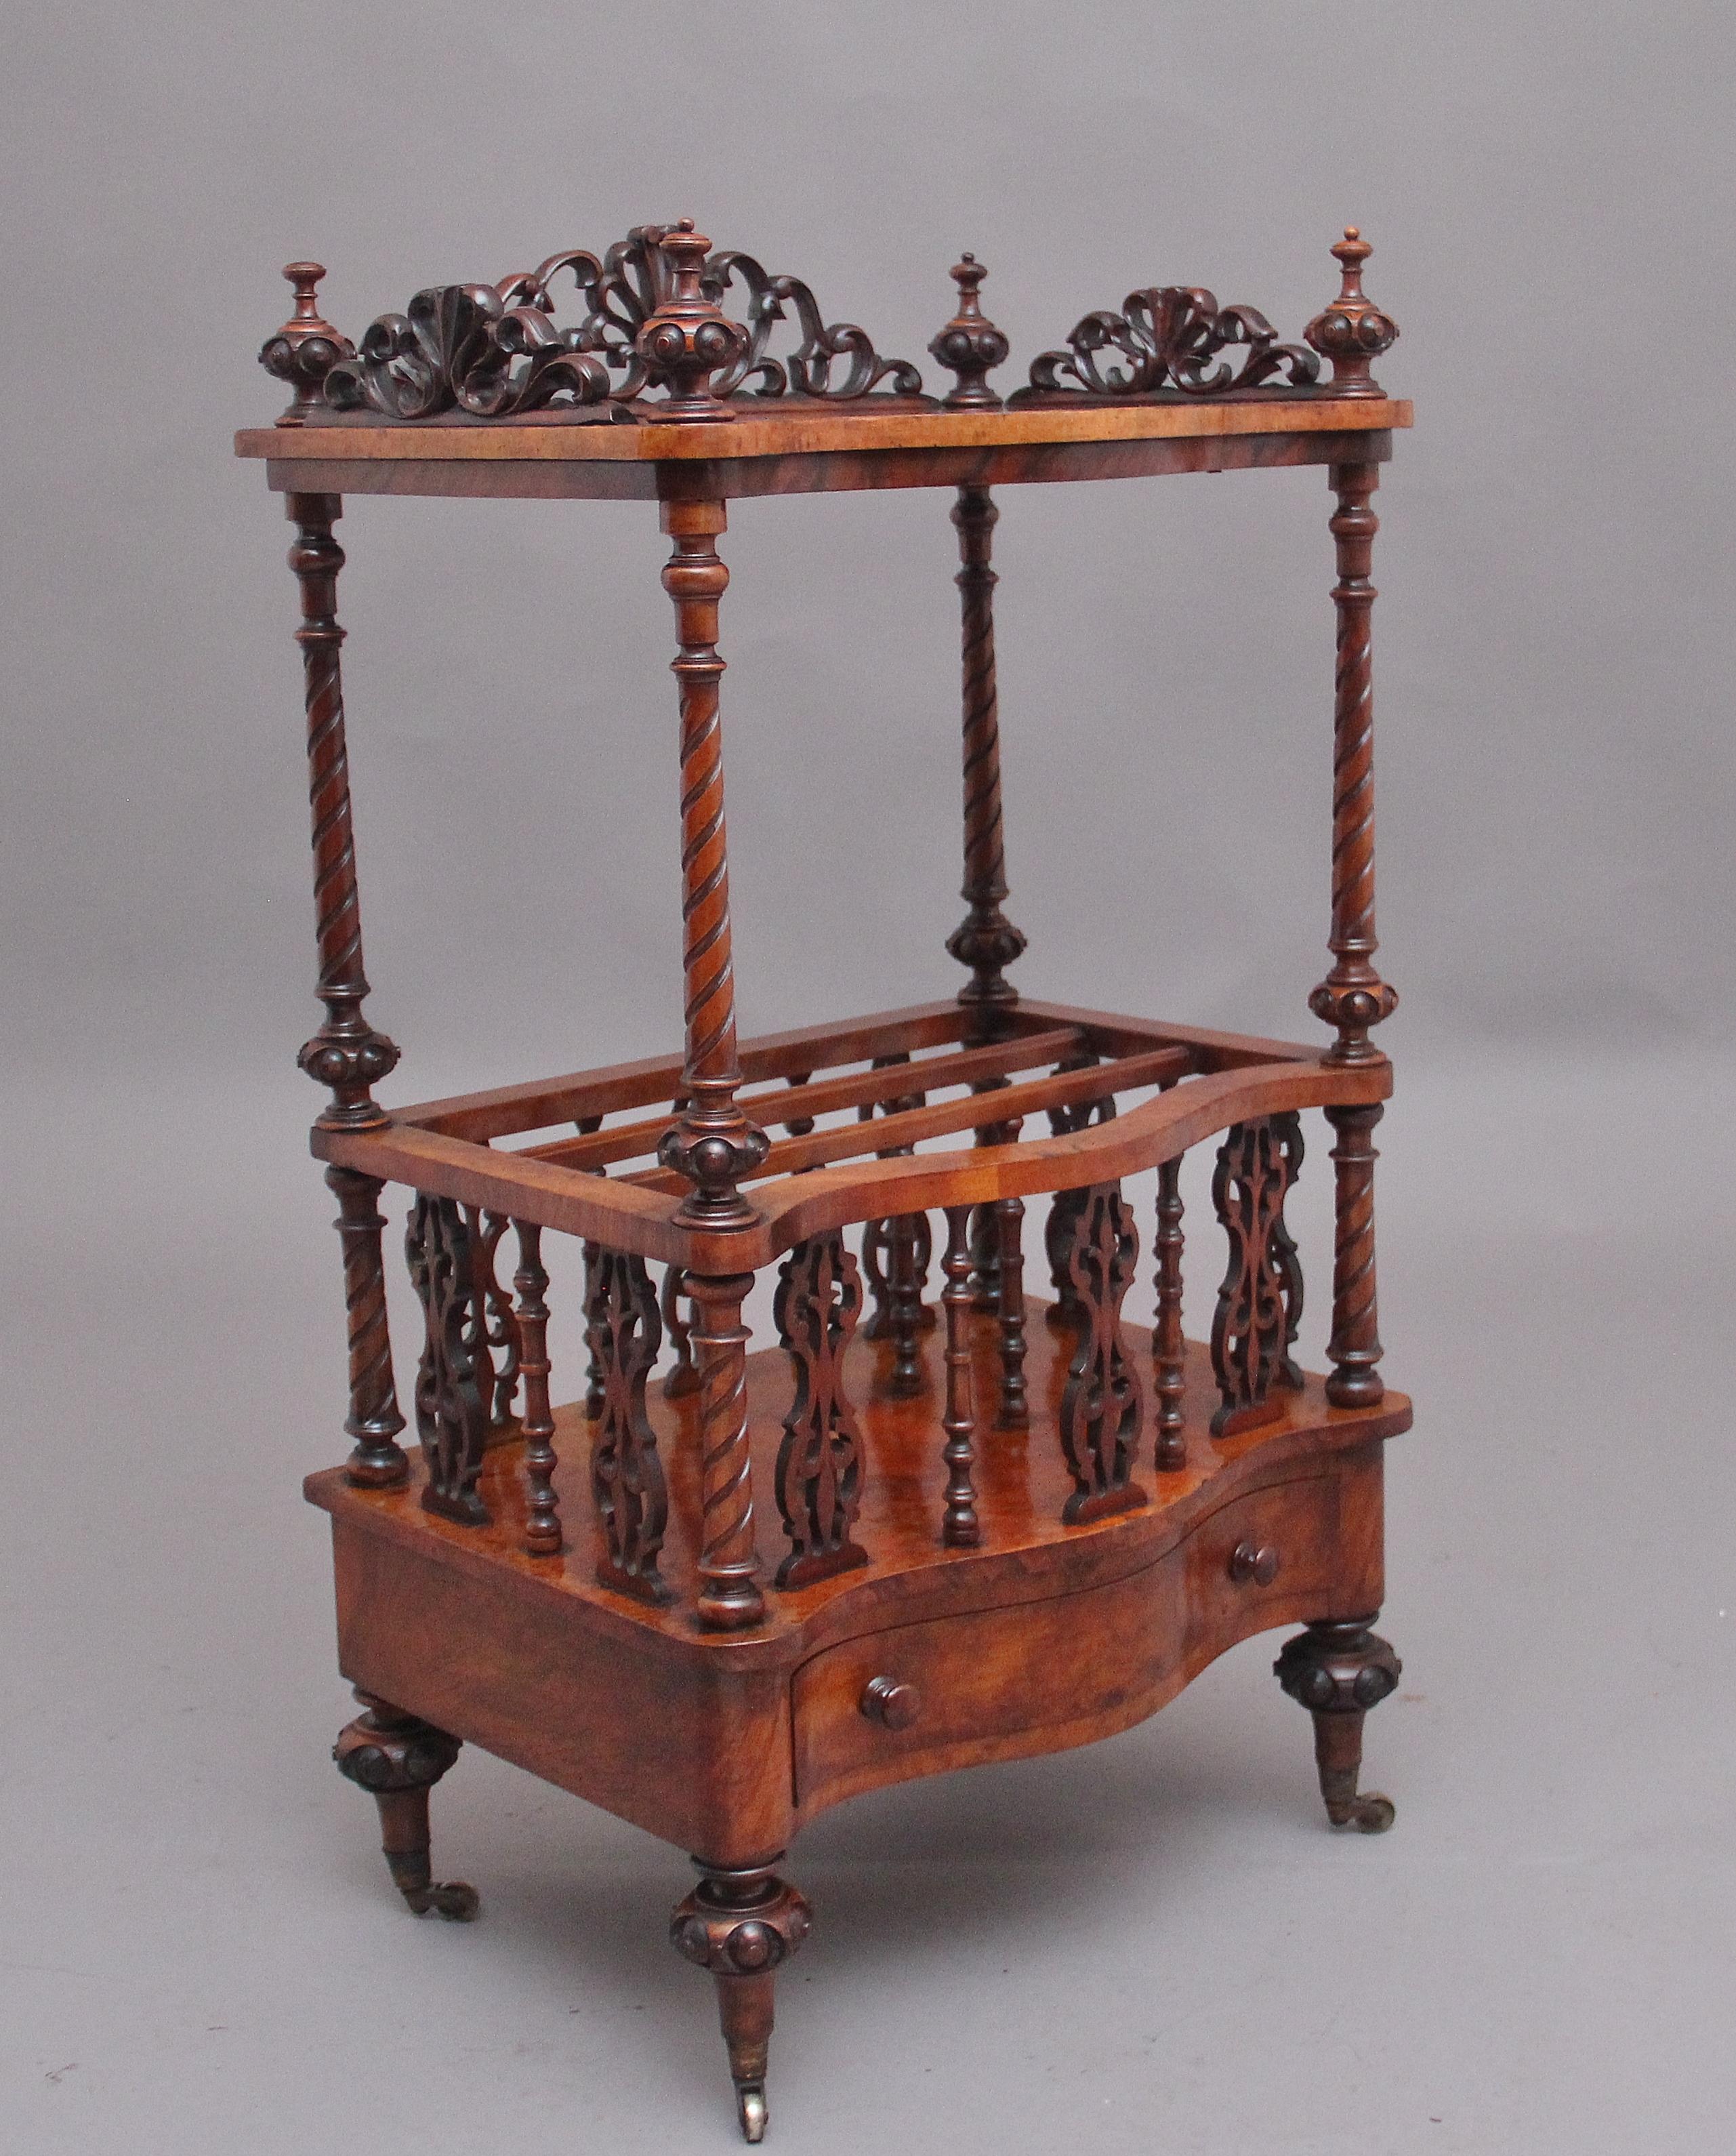 19th Century burr walnut Canterbury of serpentine form, the top having a highly decorative pierced and carved gallery with carved finials in each corner, supported on spiral carved turned columns, the middle section having three divisions which is